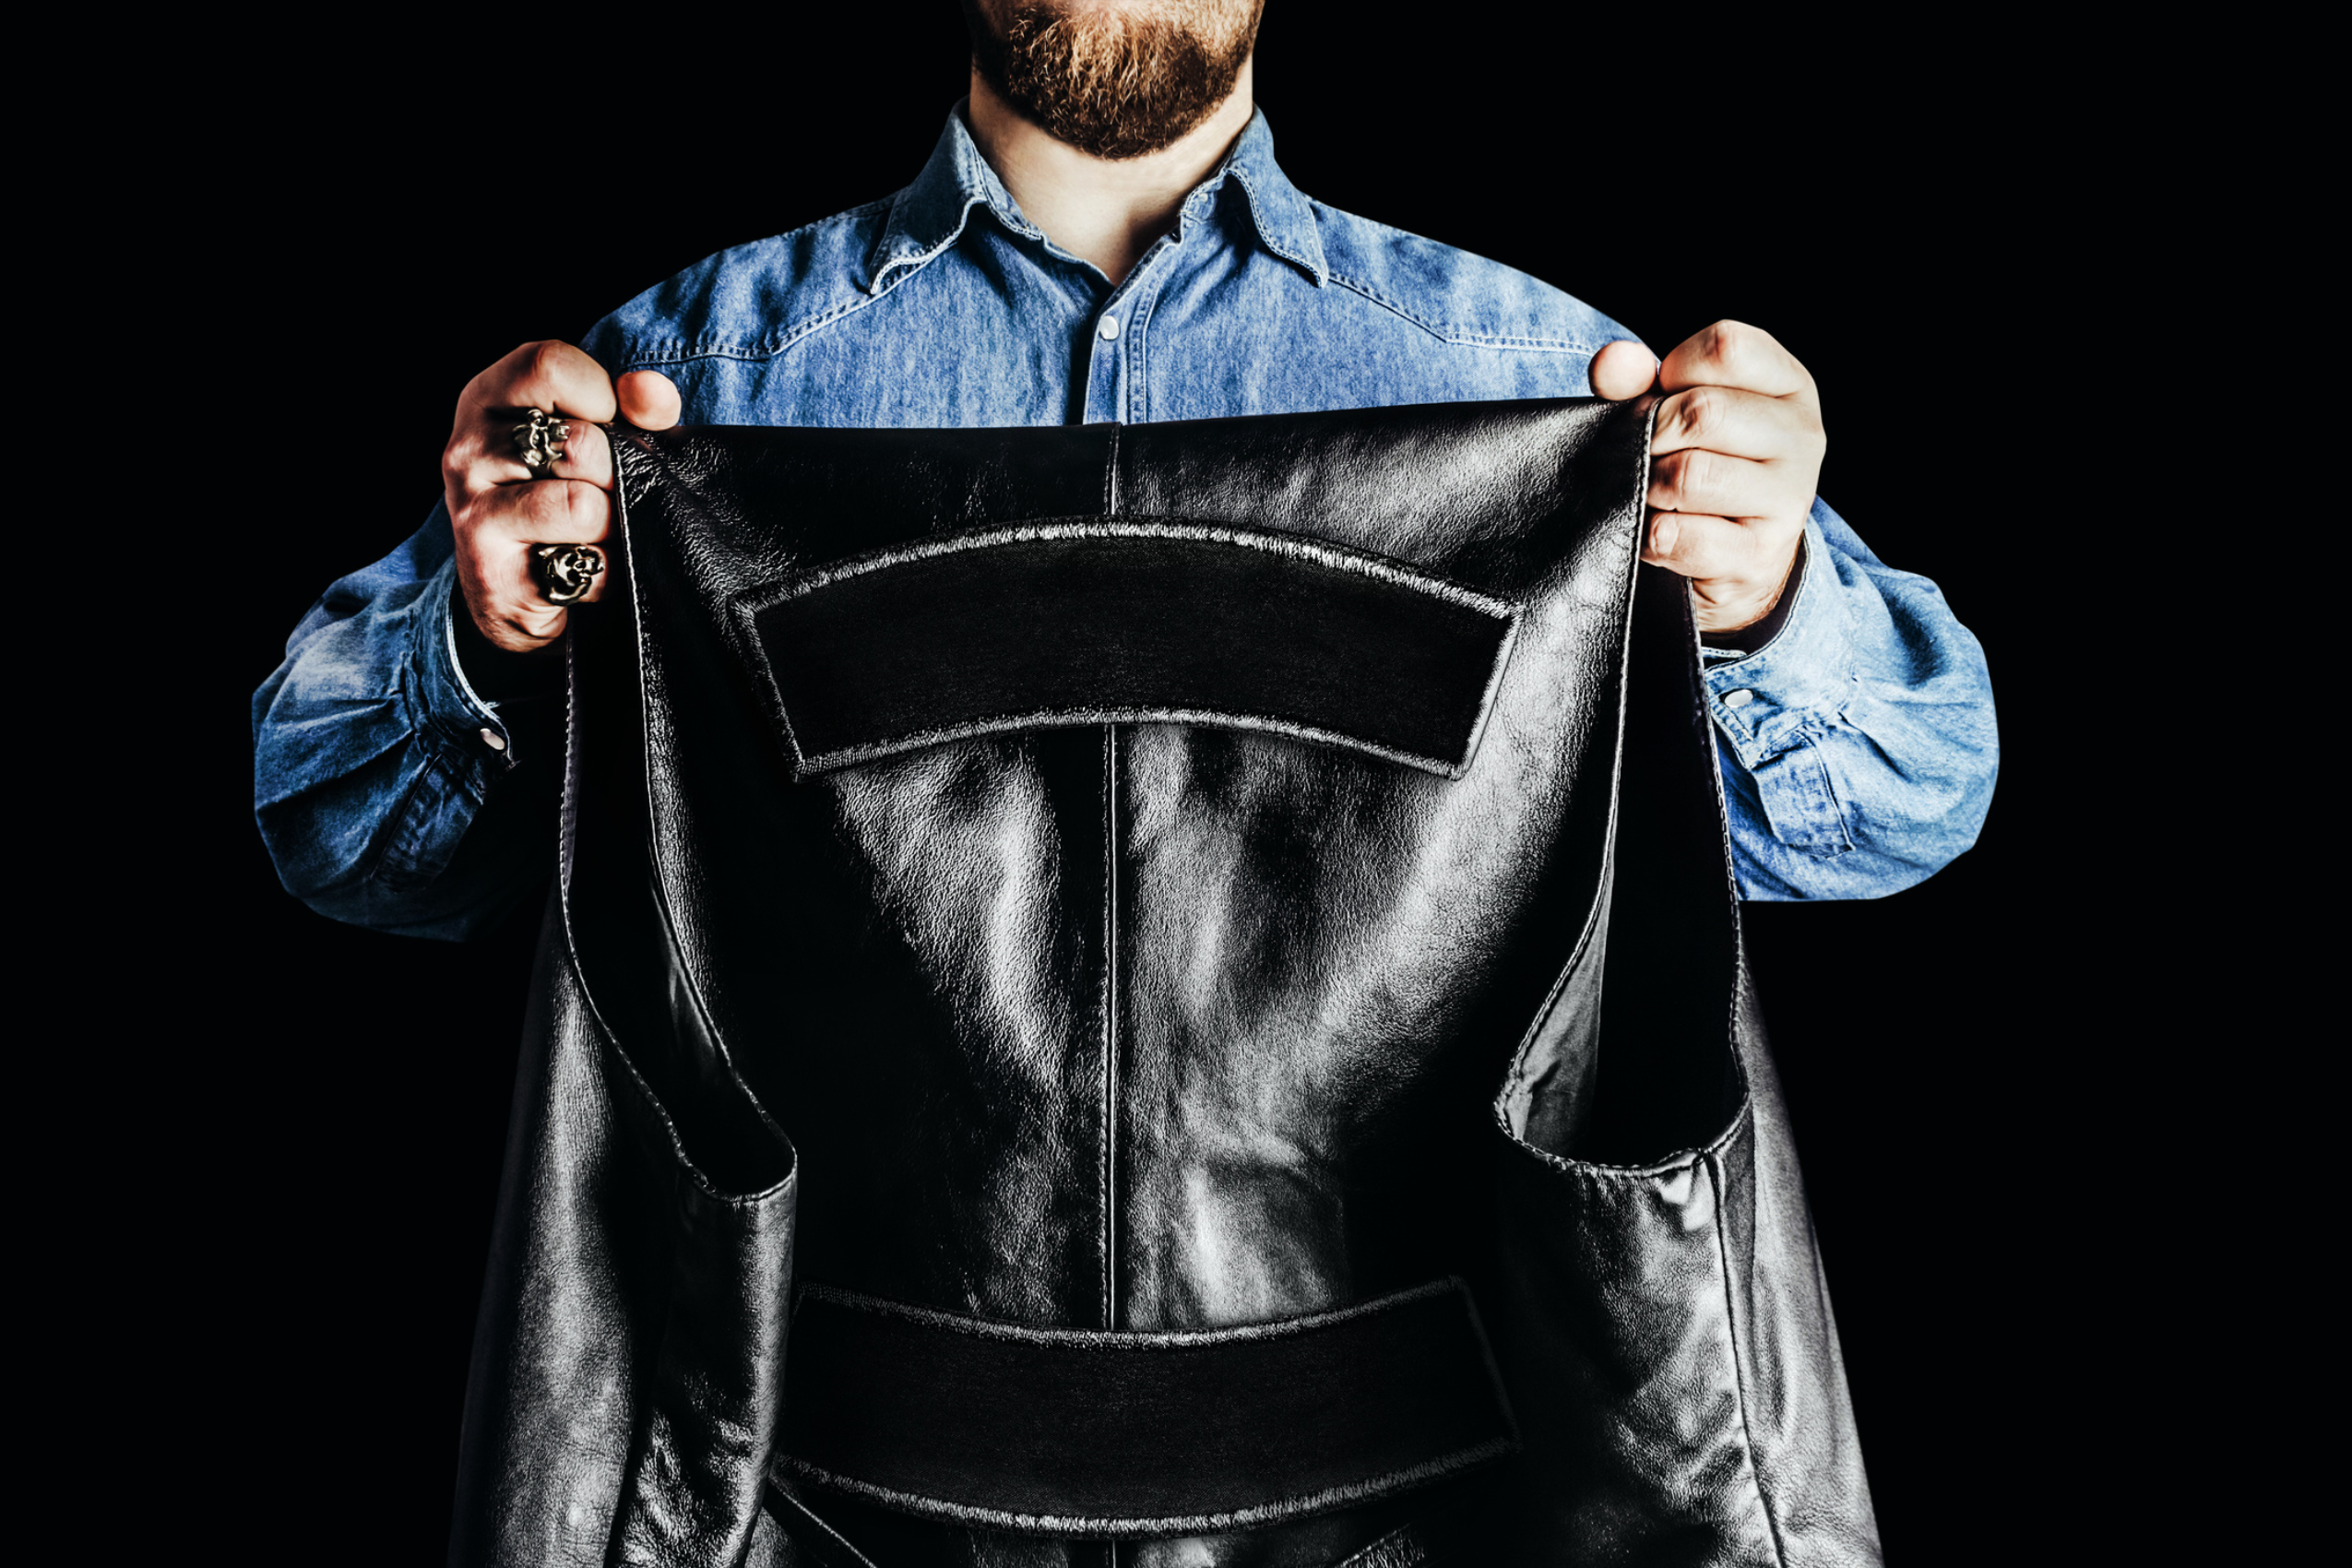 Types Of Patches For Biker Jackets